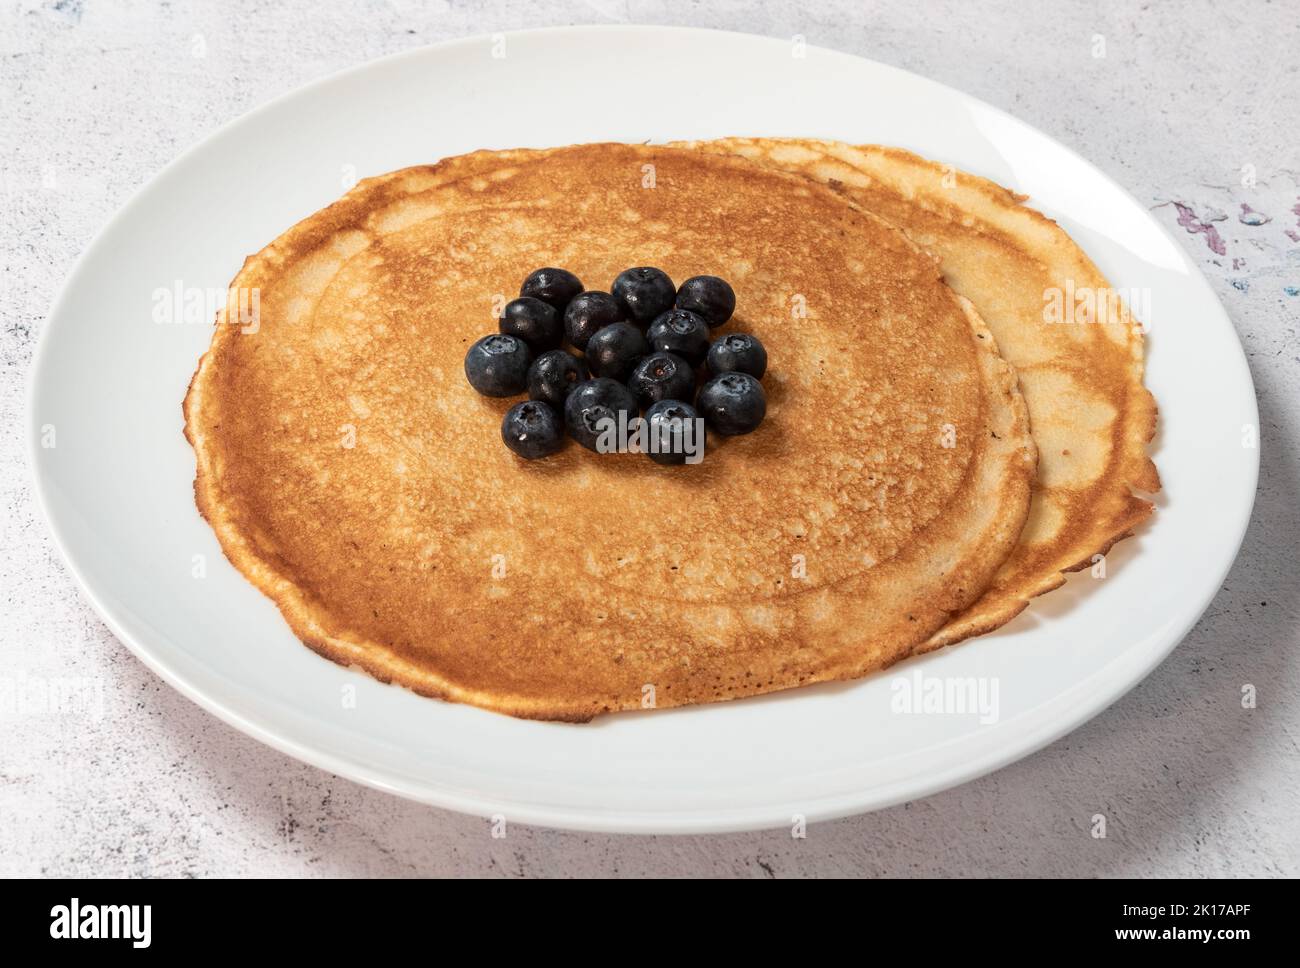 Pancakes with blueberries Stock Photo